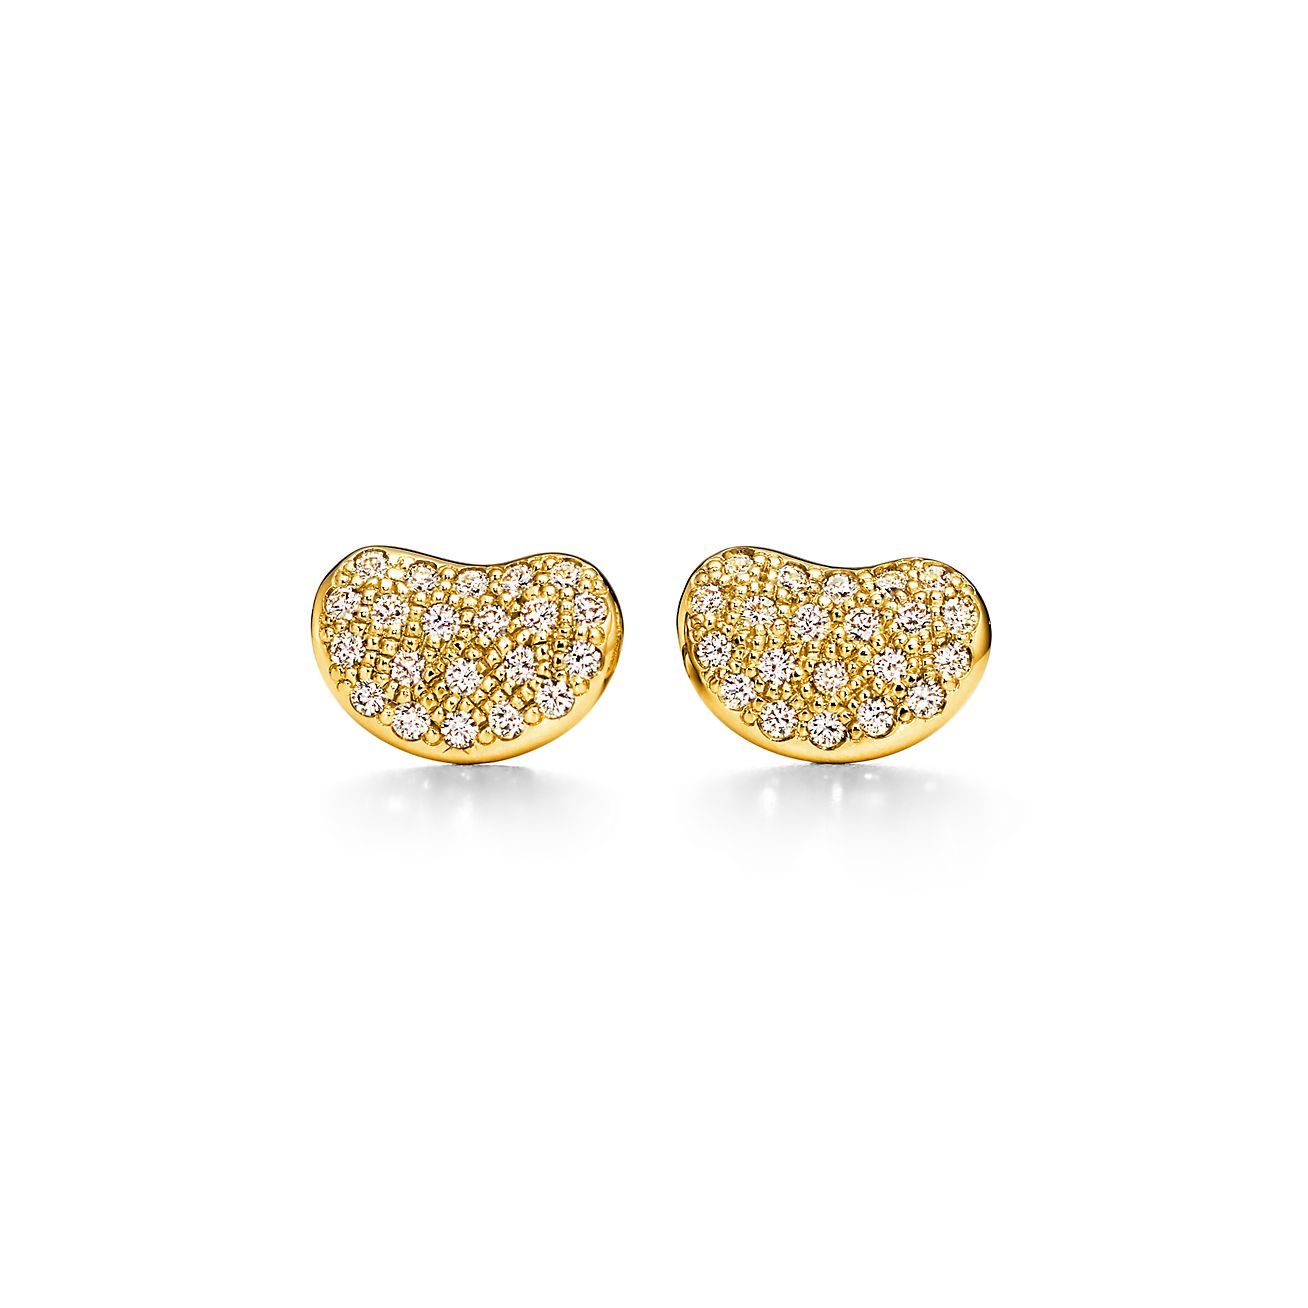 Elsa Peretti™ Bean design Earrings in Yellow Gold with Pavé Diamonds, 9 mm  | Tiffany & Co.